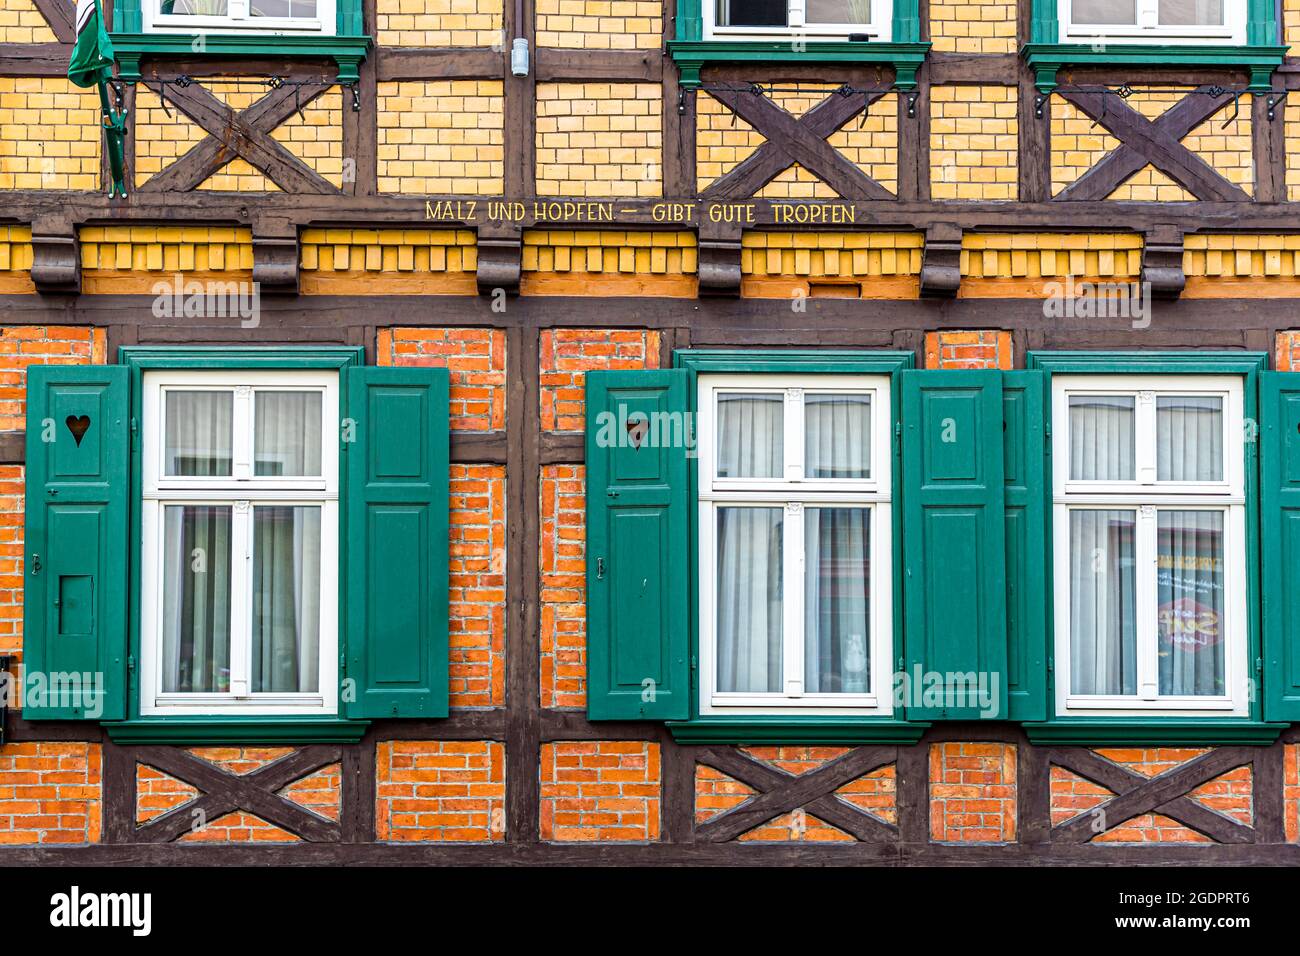 Facade of the Lüdde brewery in Quedlinburg, Germany (MALT AND HOP - GIVE GOOD DROPS) Stock Photo